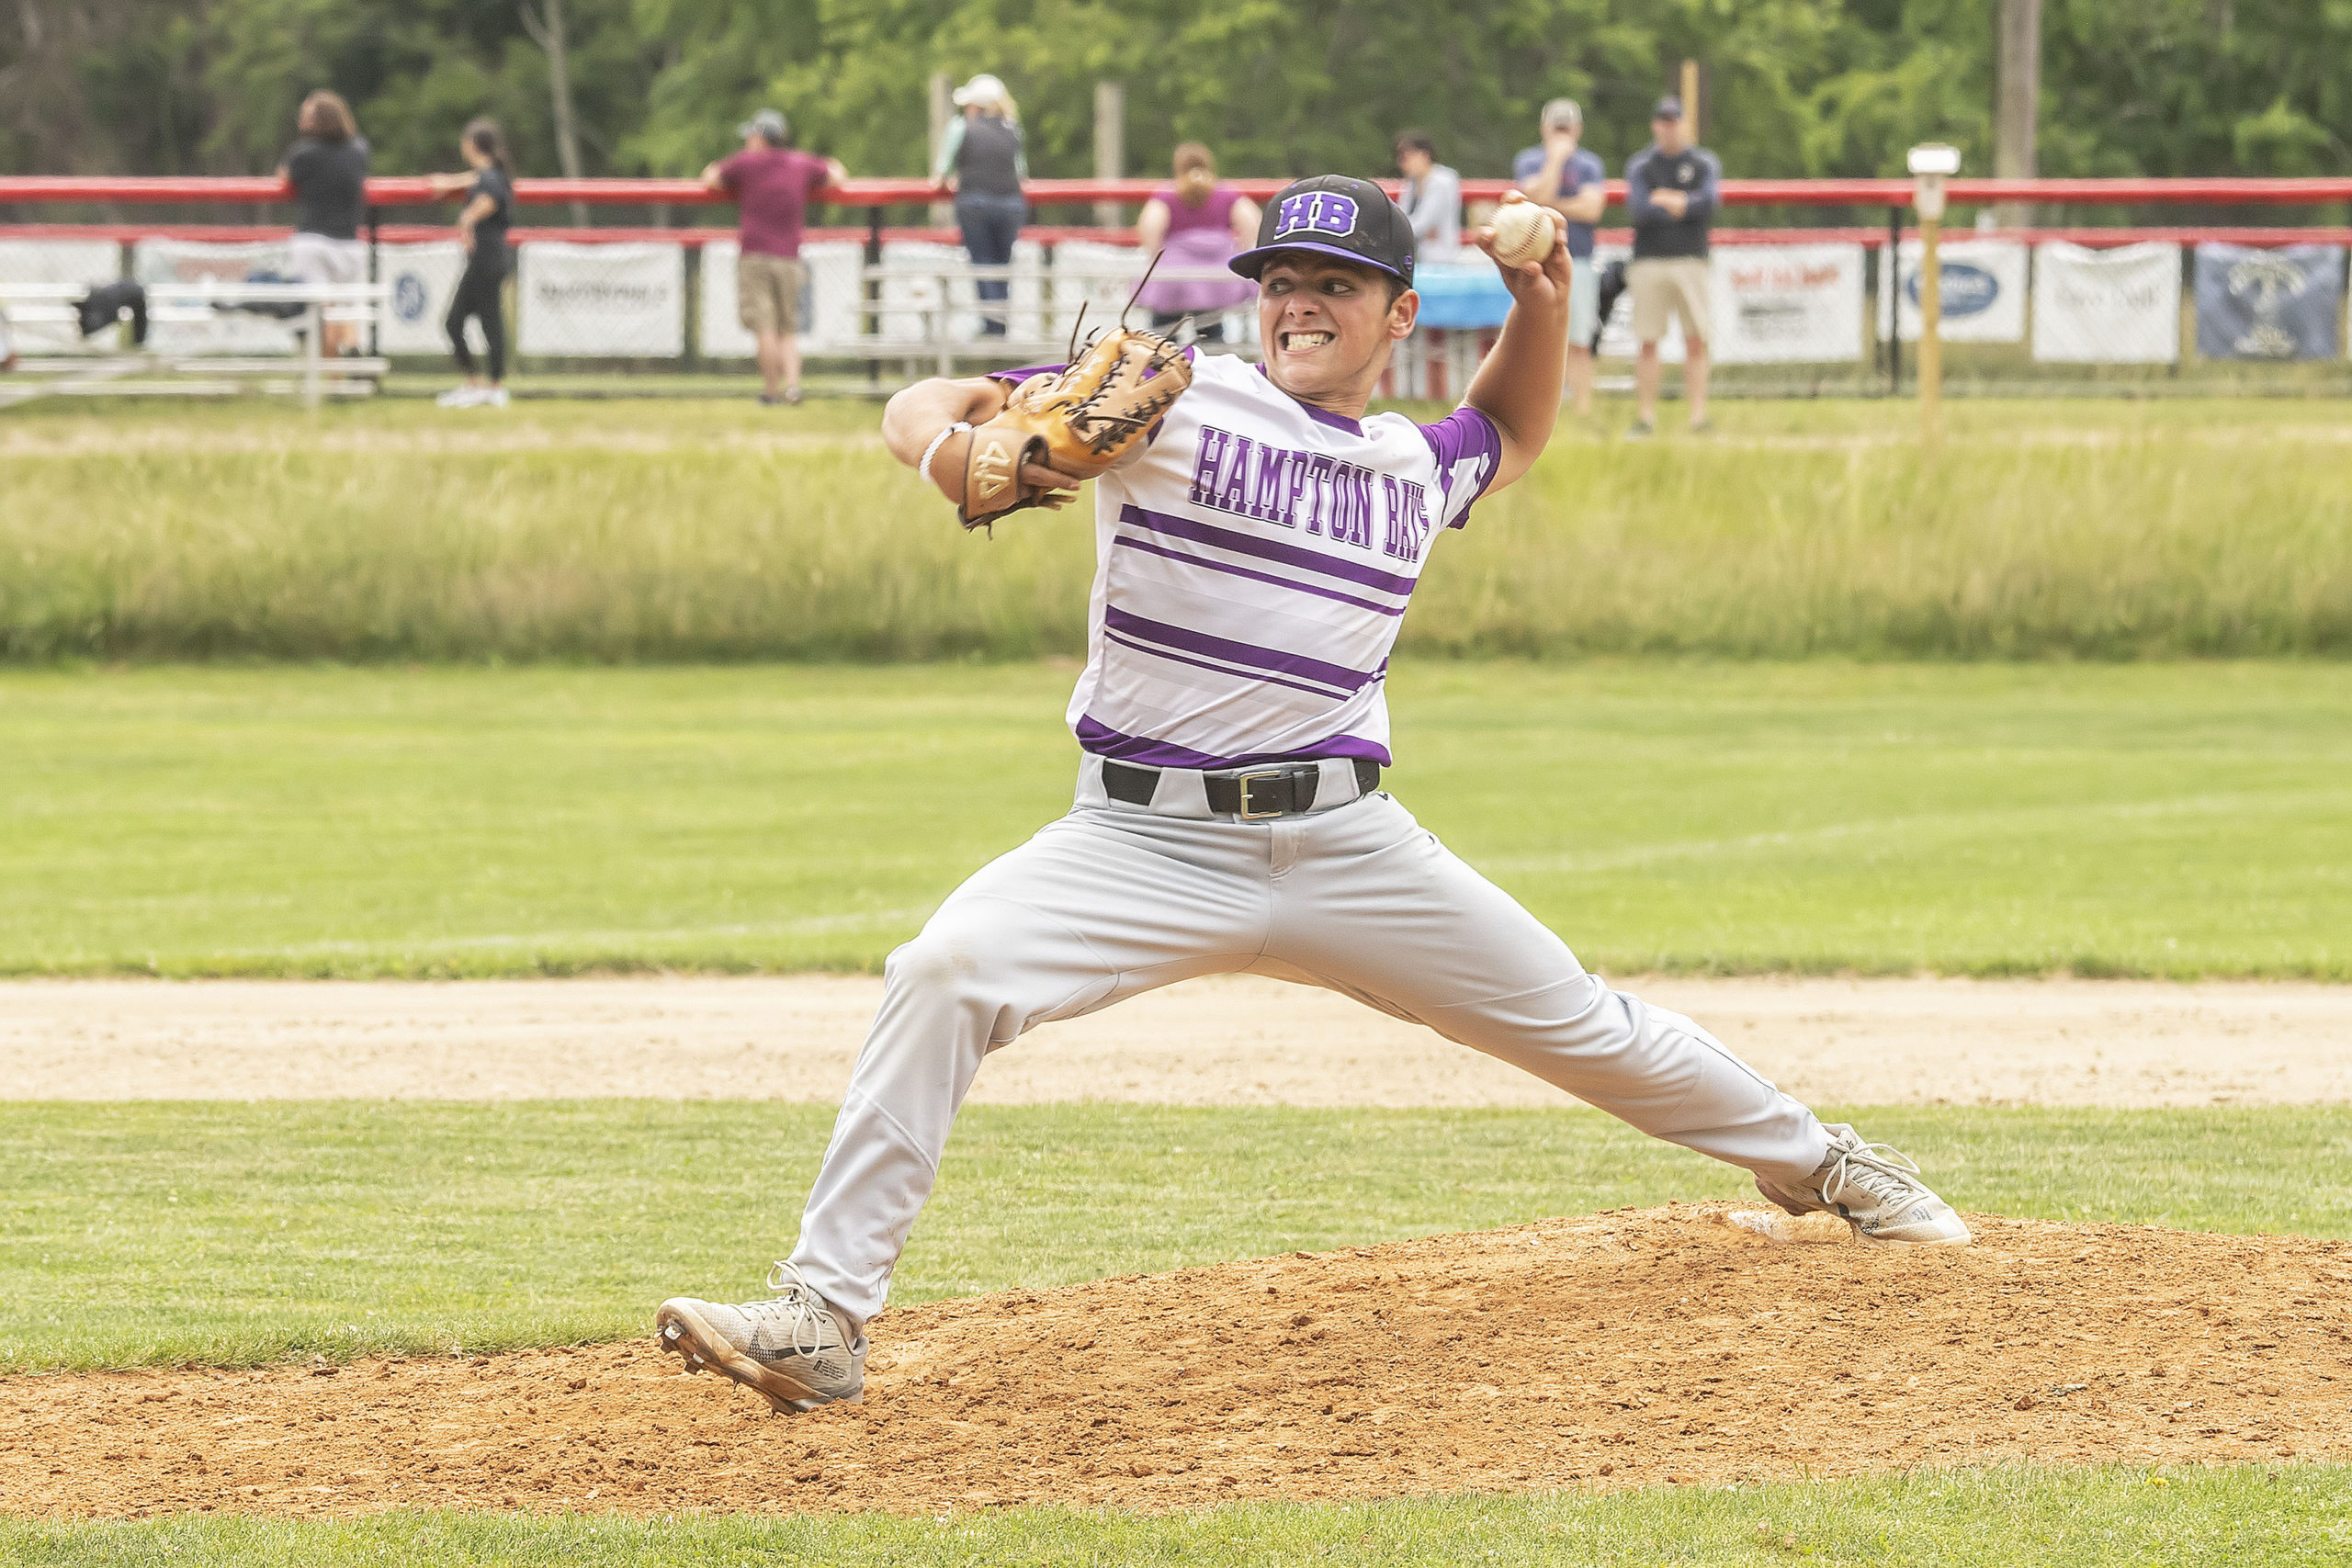 Hampton Bays senior Jordan Adelson pitched a complete game on Saturday.